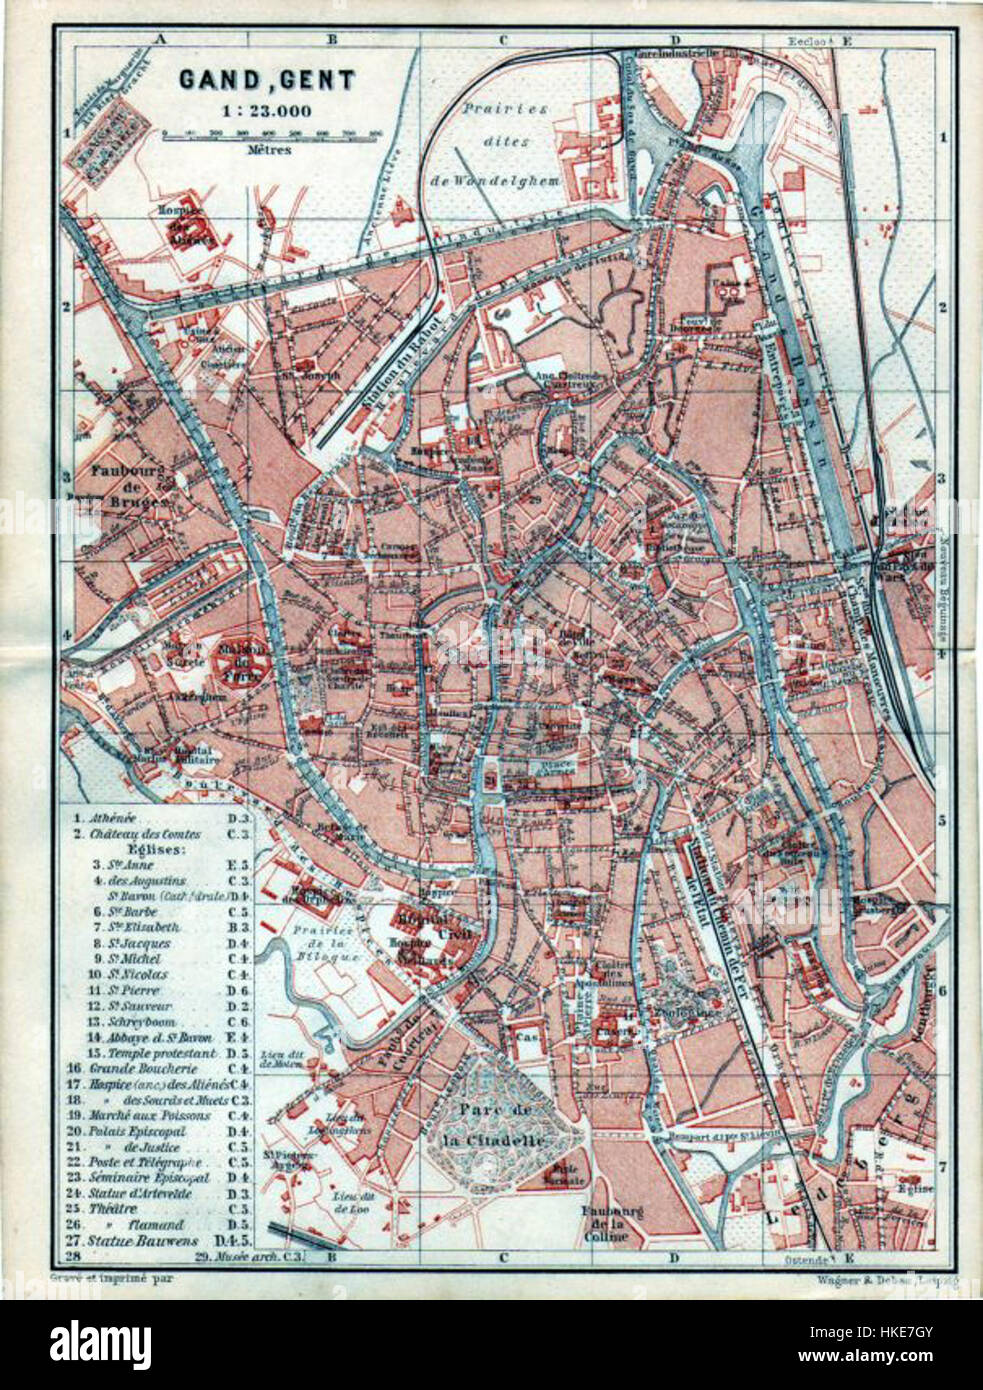 Map of Ghent by Wagner and Debes, 1897 Stock Photo